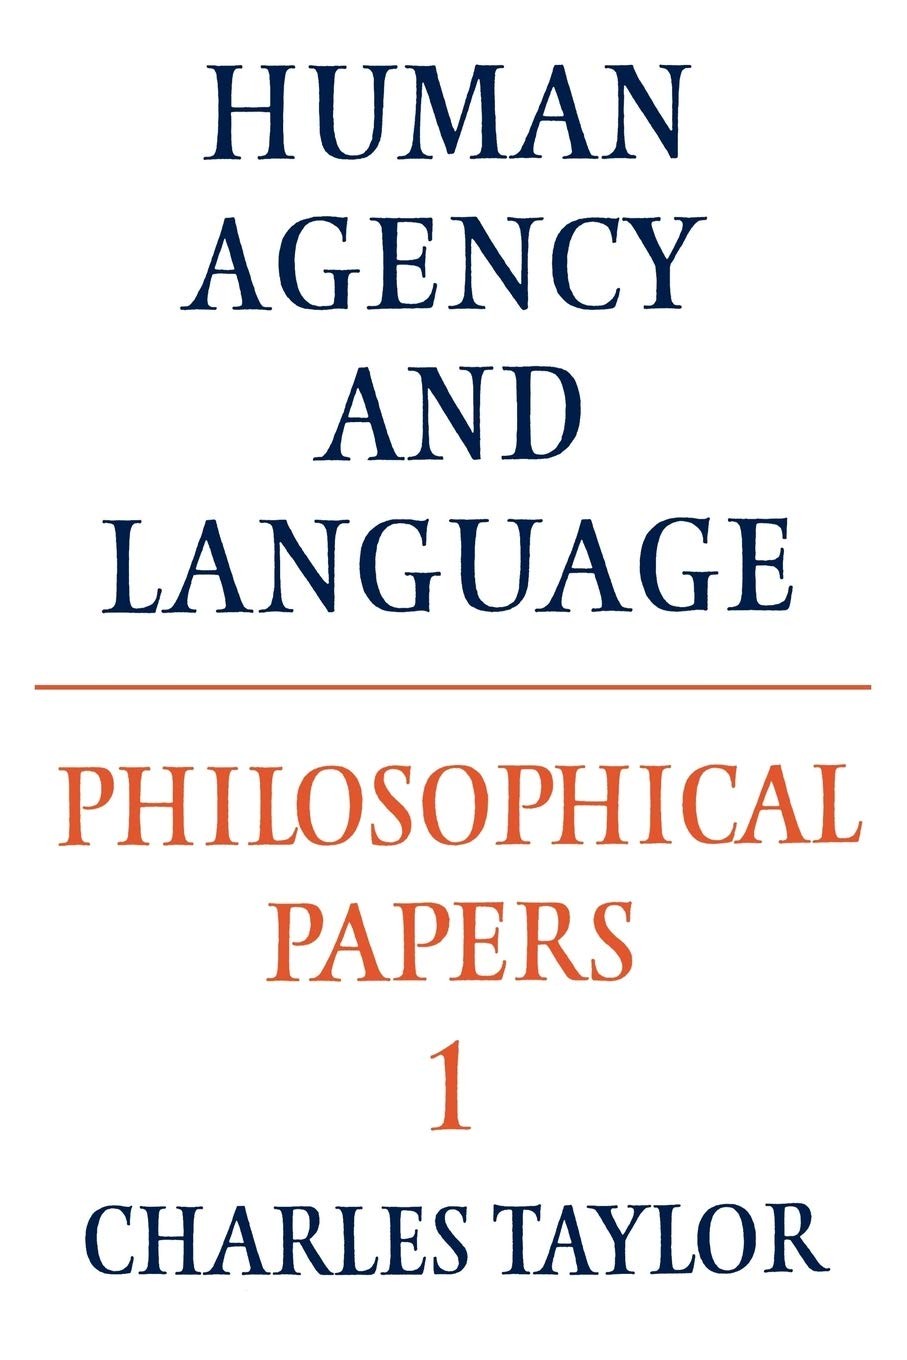 Philosophical Papers: Volume 1, Human Agency and Language